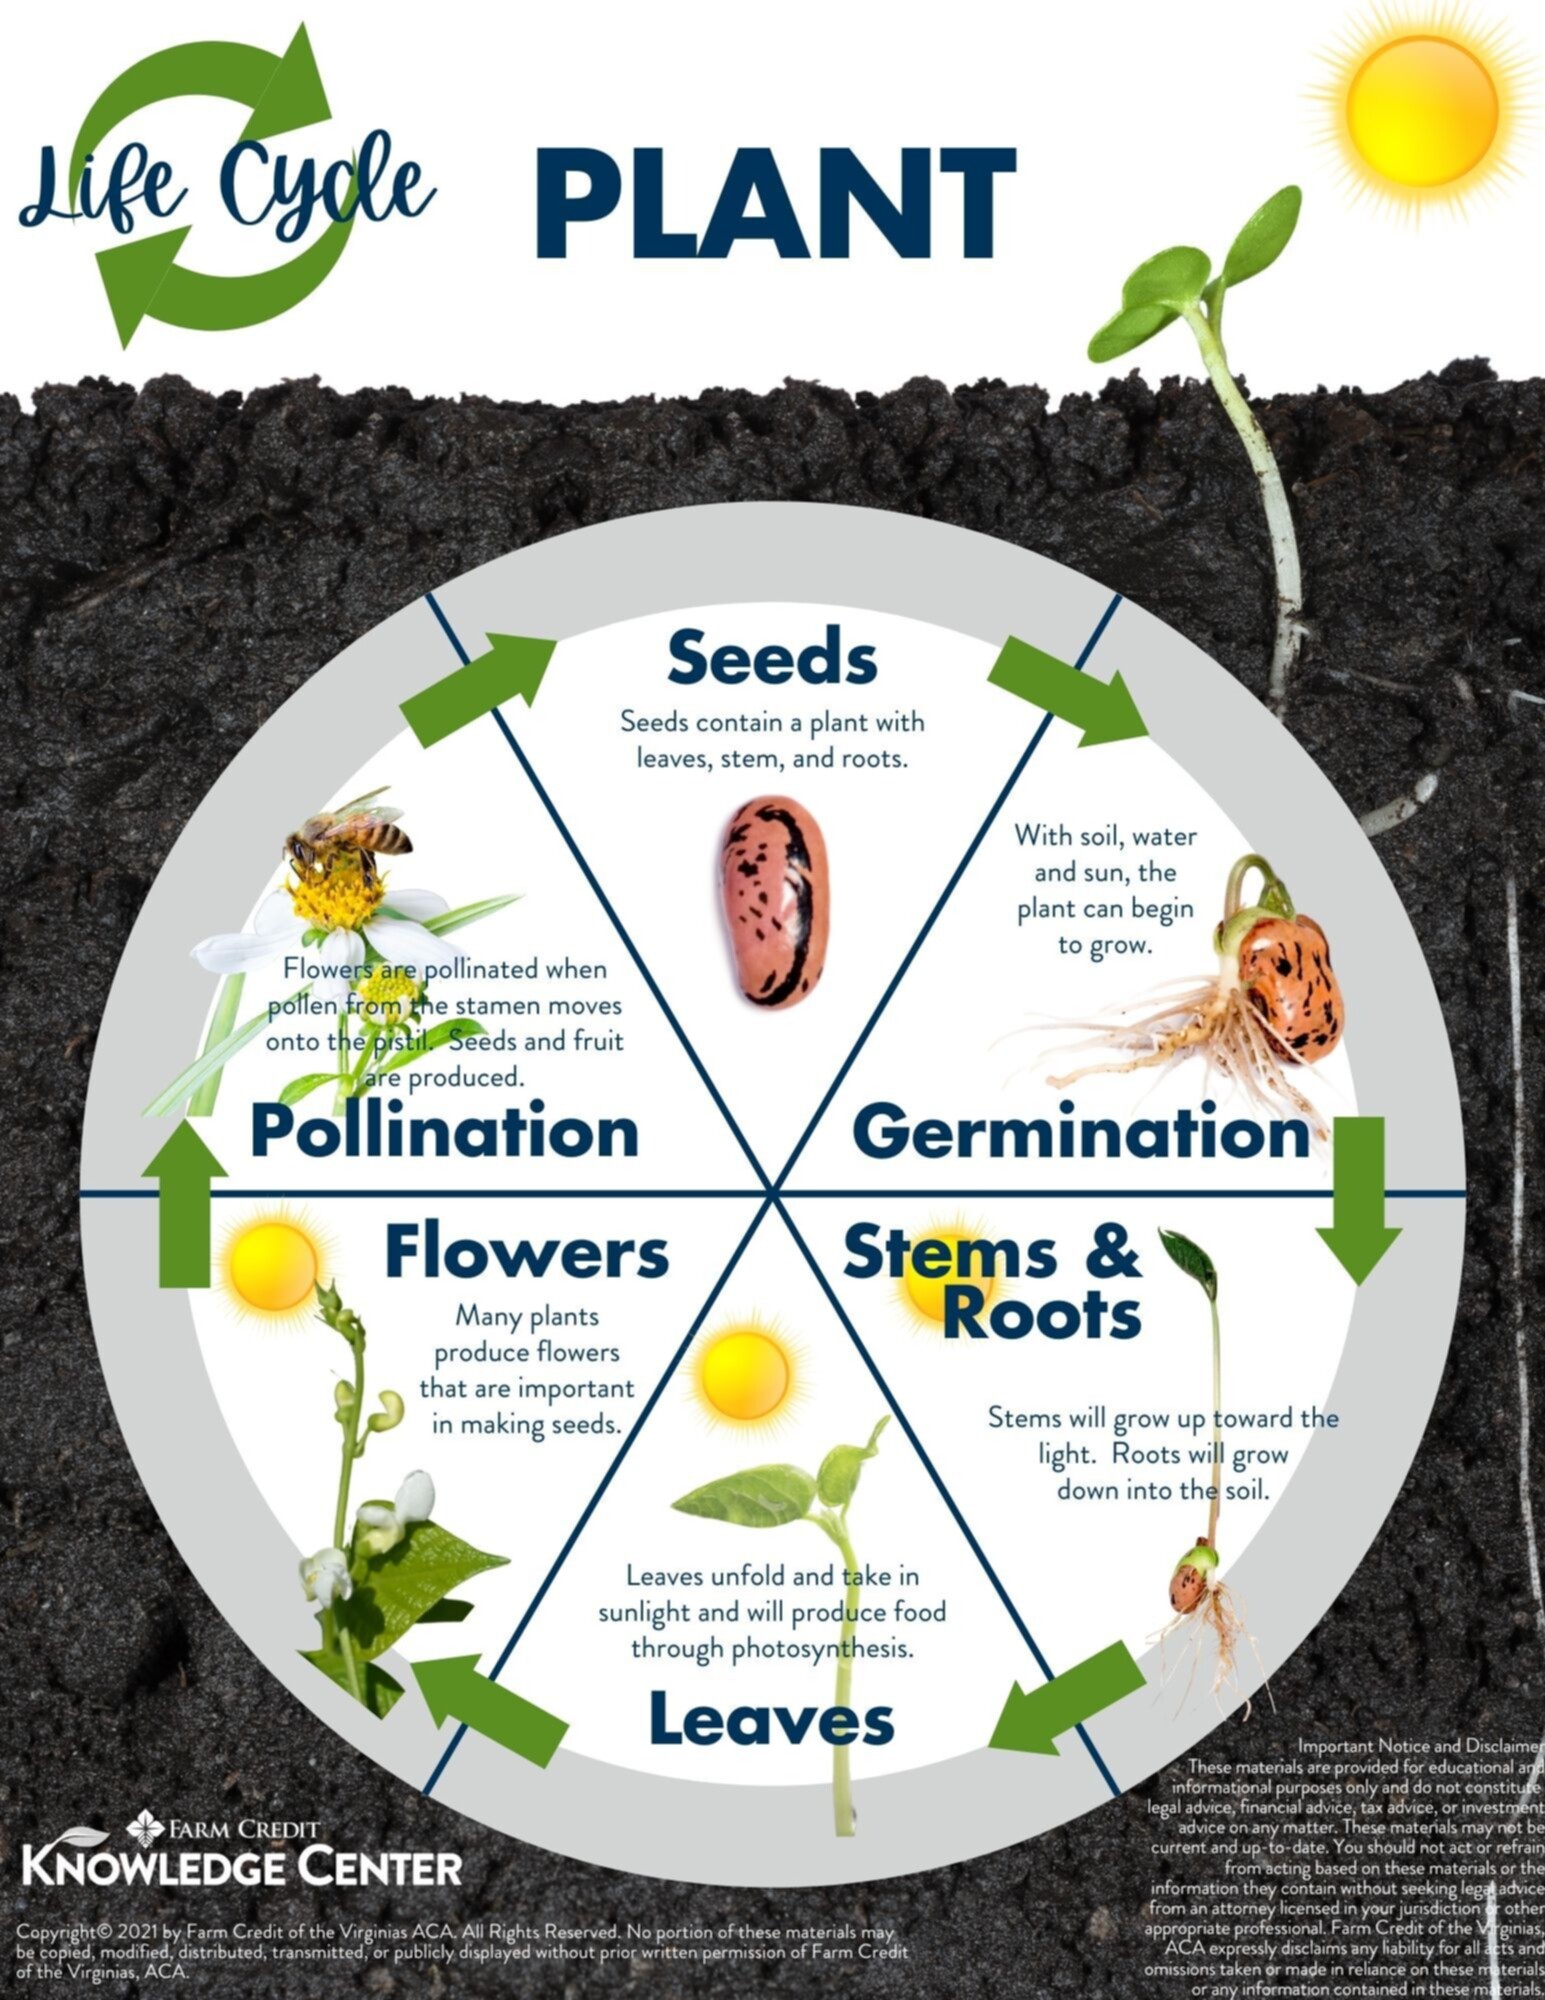 life cycle of a plant | farm credit of the virginias